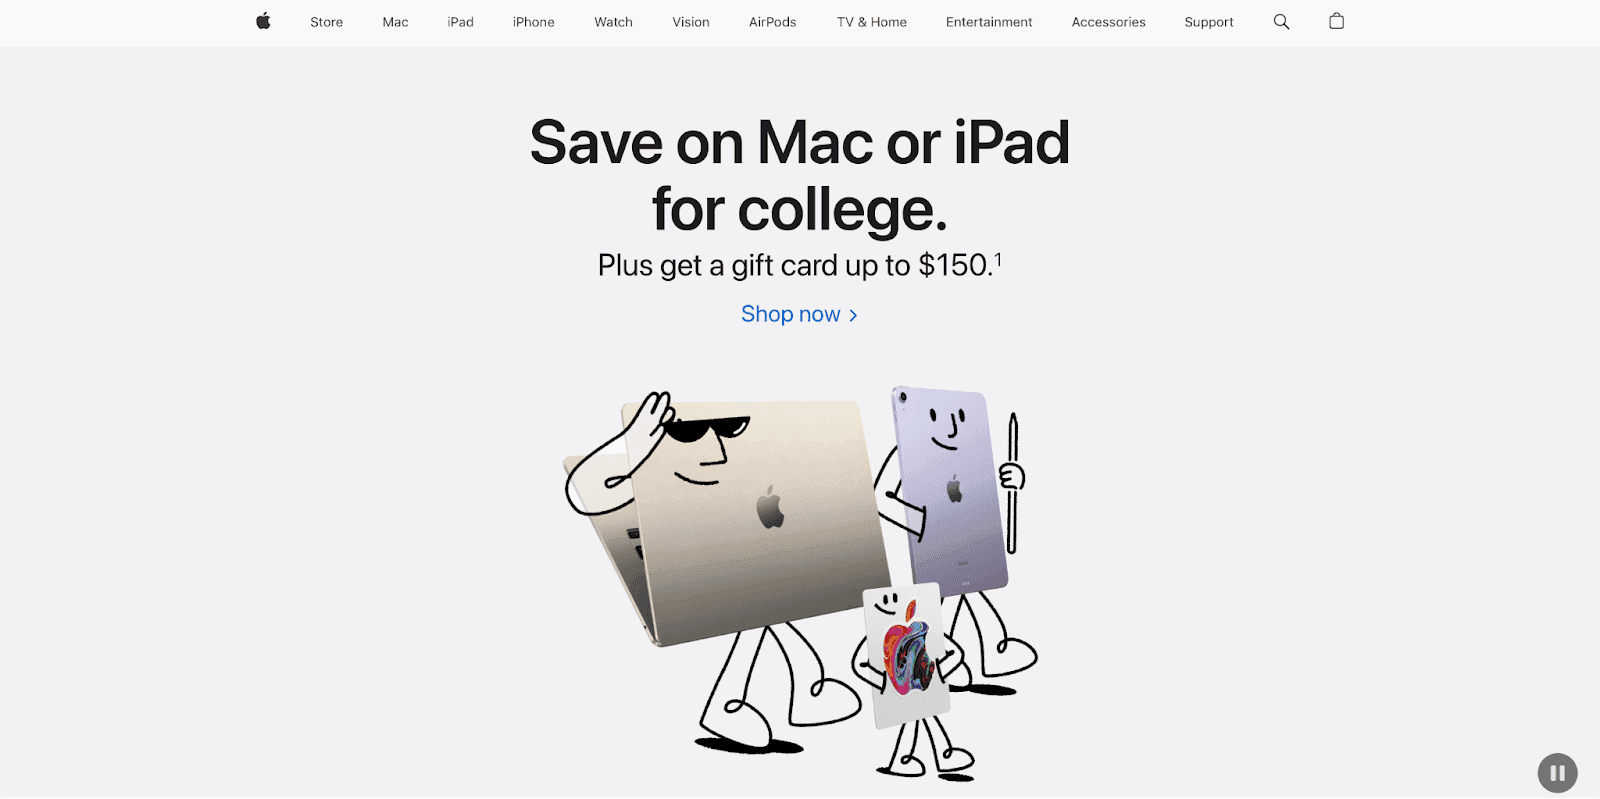 Apple homepage - Save on Mac or iPad for college header